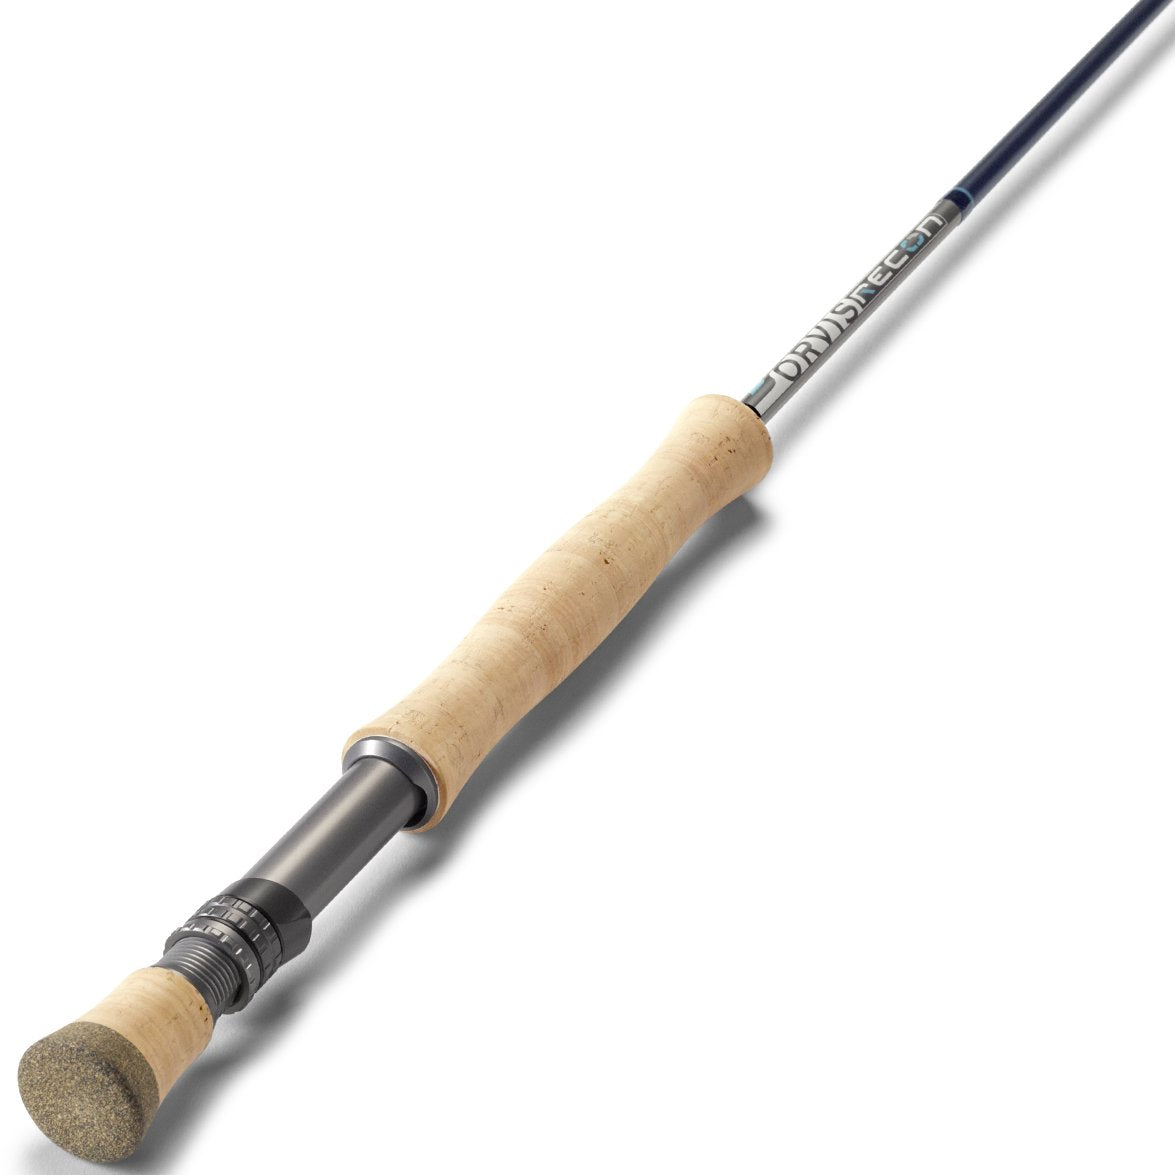 Orvis Recon 2 Saltwater Fly Rod - The Saltwater Edge